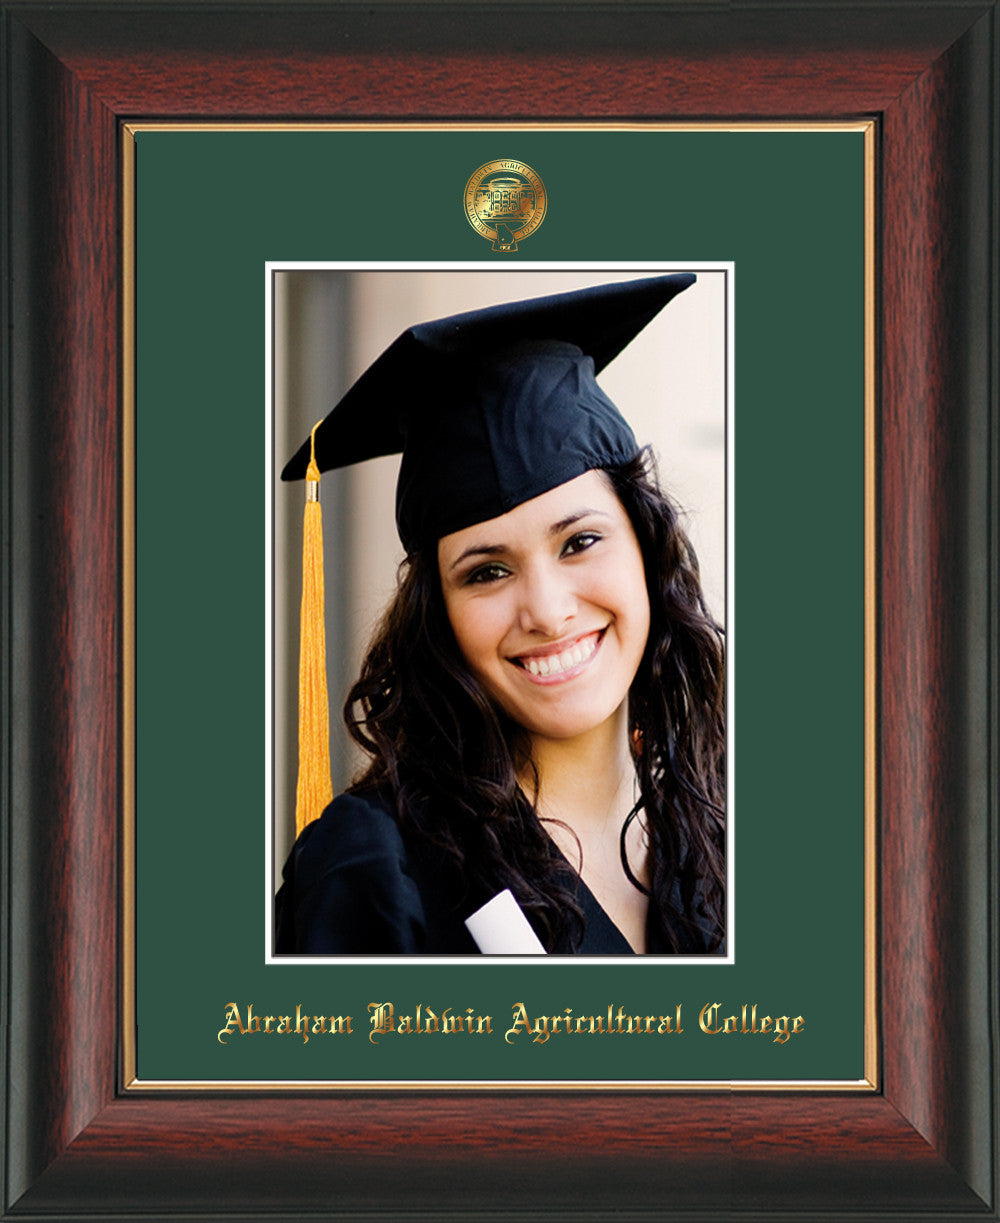 Abraham Baldwin Agricultural College Seal 5 x 7 Photo Frame